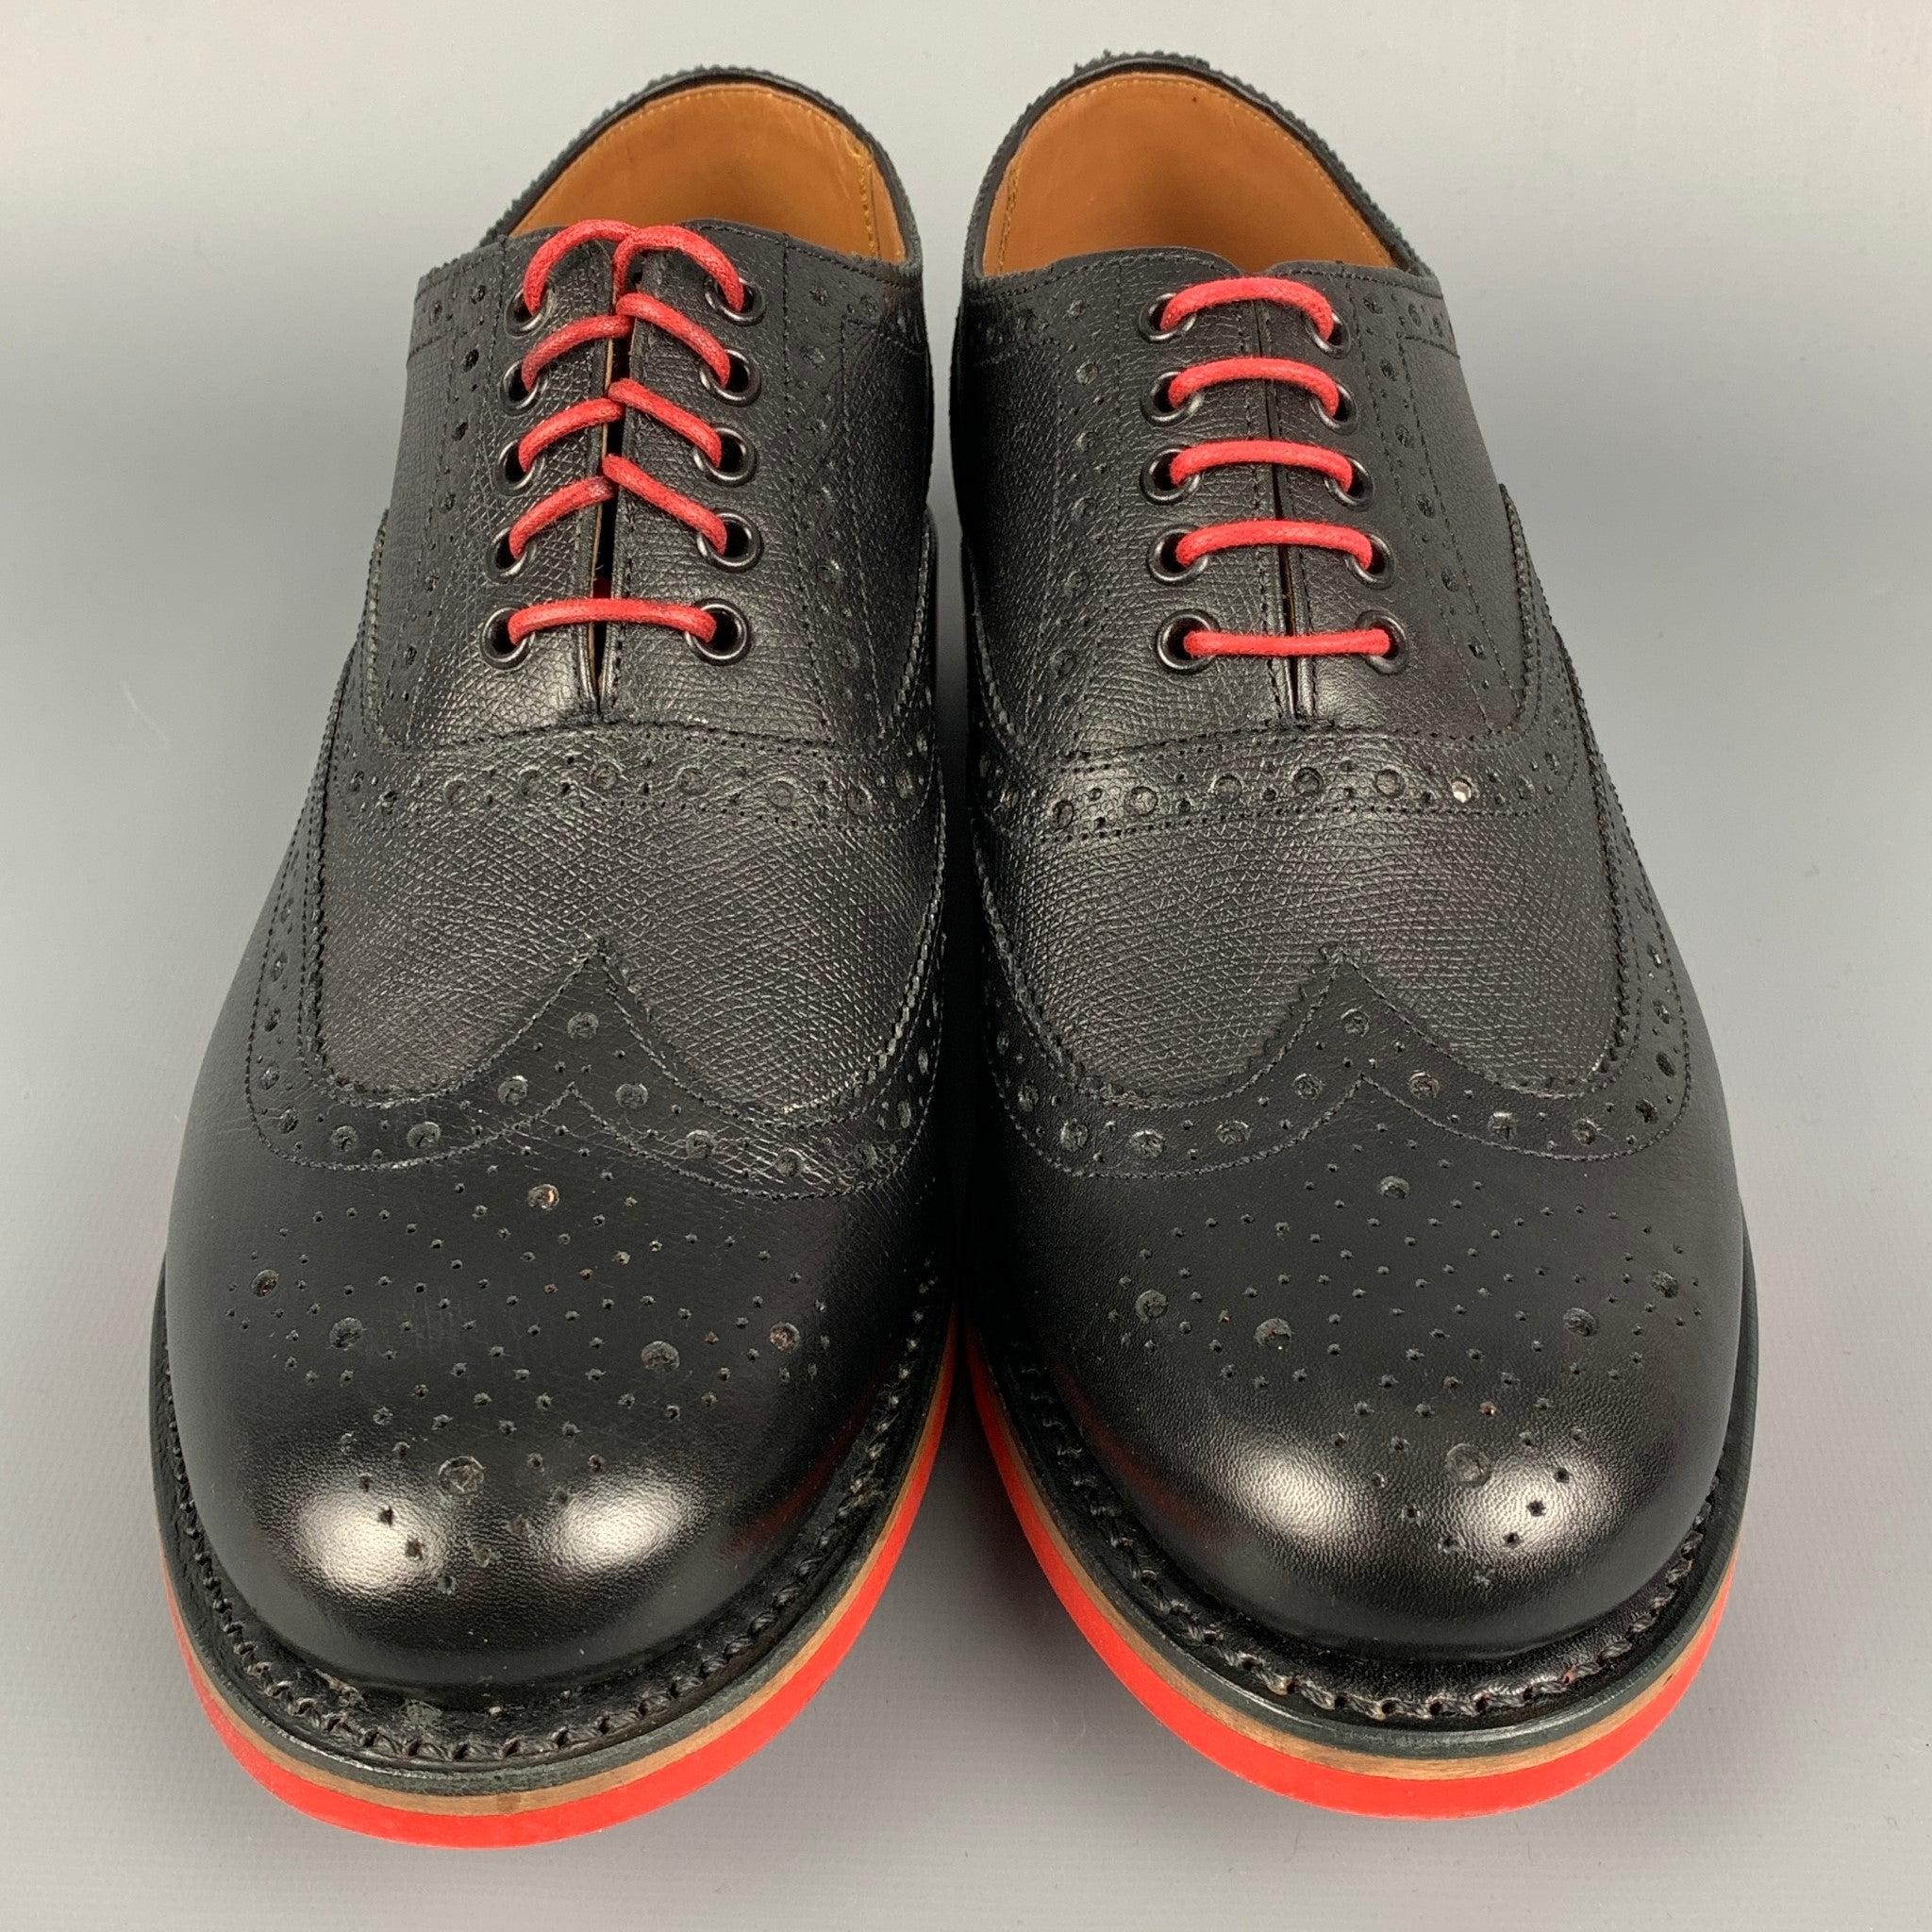 Men's GRENSON Size 8.5 Black & Red Perforated Leather Wingtip Lace Up Shoes For Sale